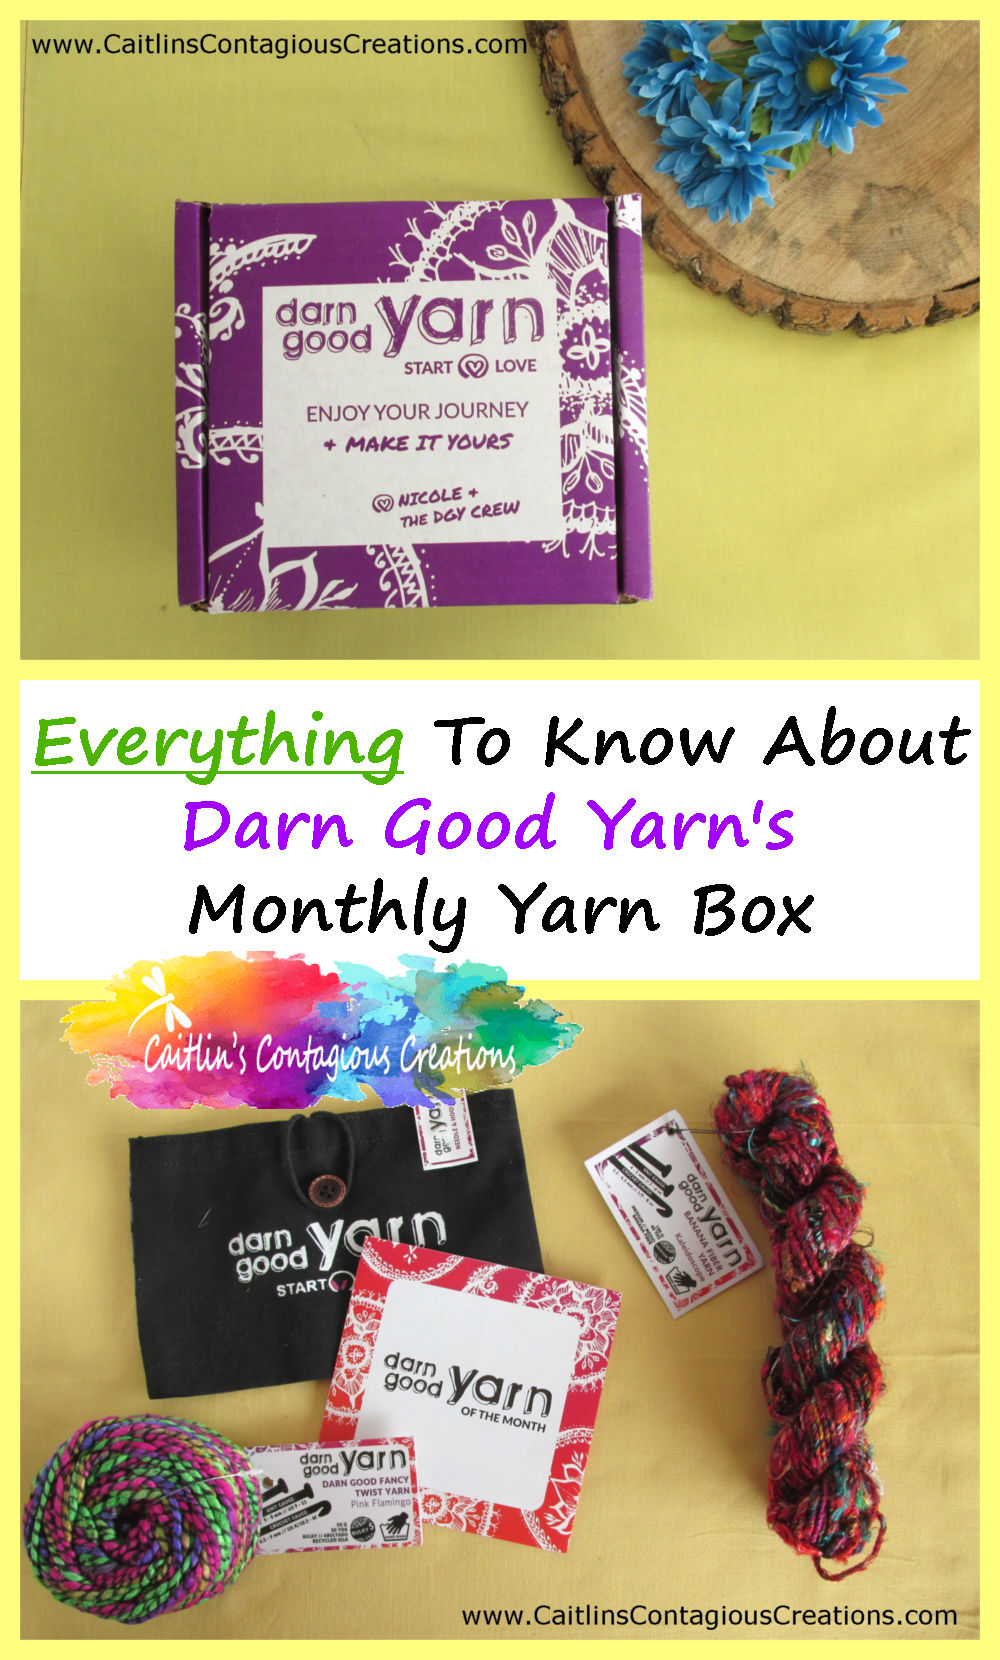 Darn Good Yarn Monthly Subscription Box for Crochet and Knitters. An honest review with all the details you need to know before you sign up for this monthly yarn club. #CrochetYarnBox